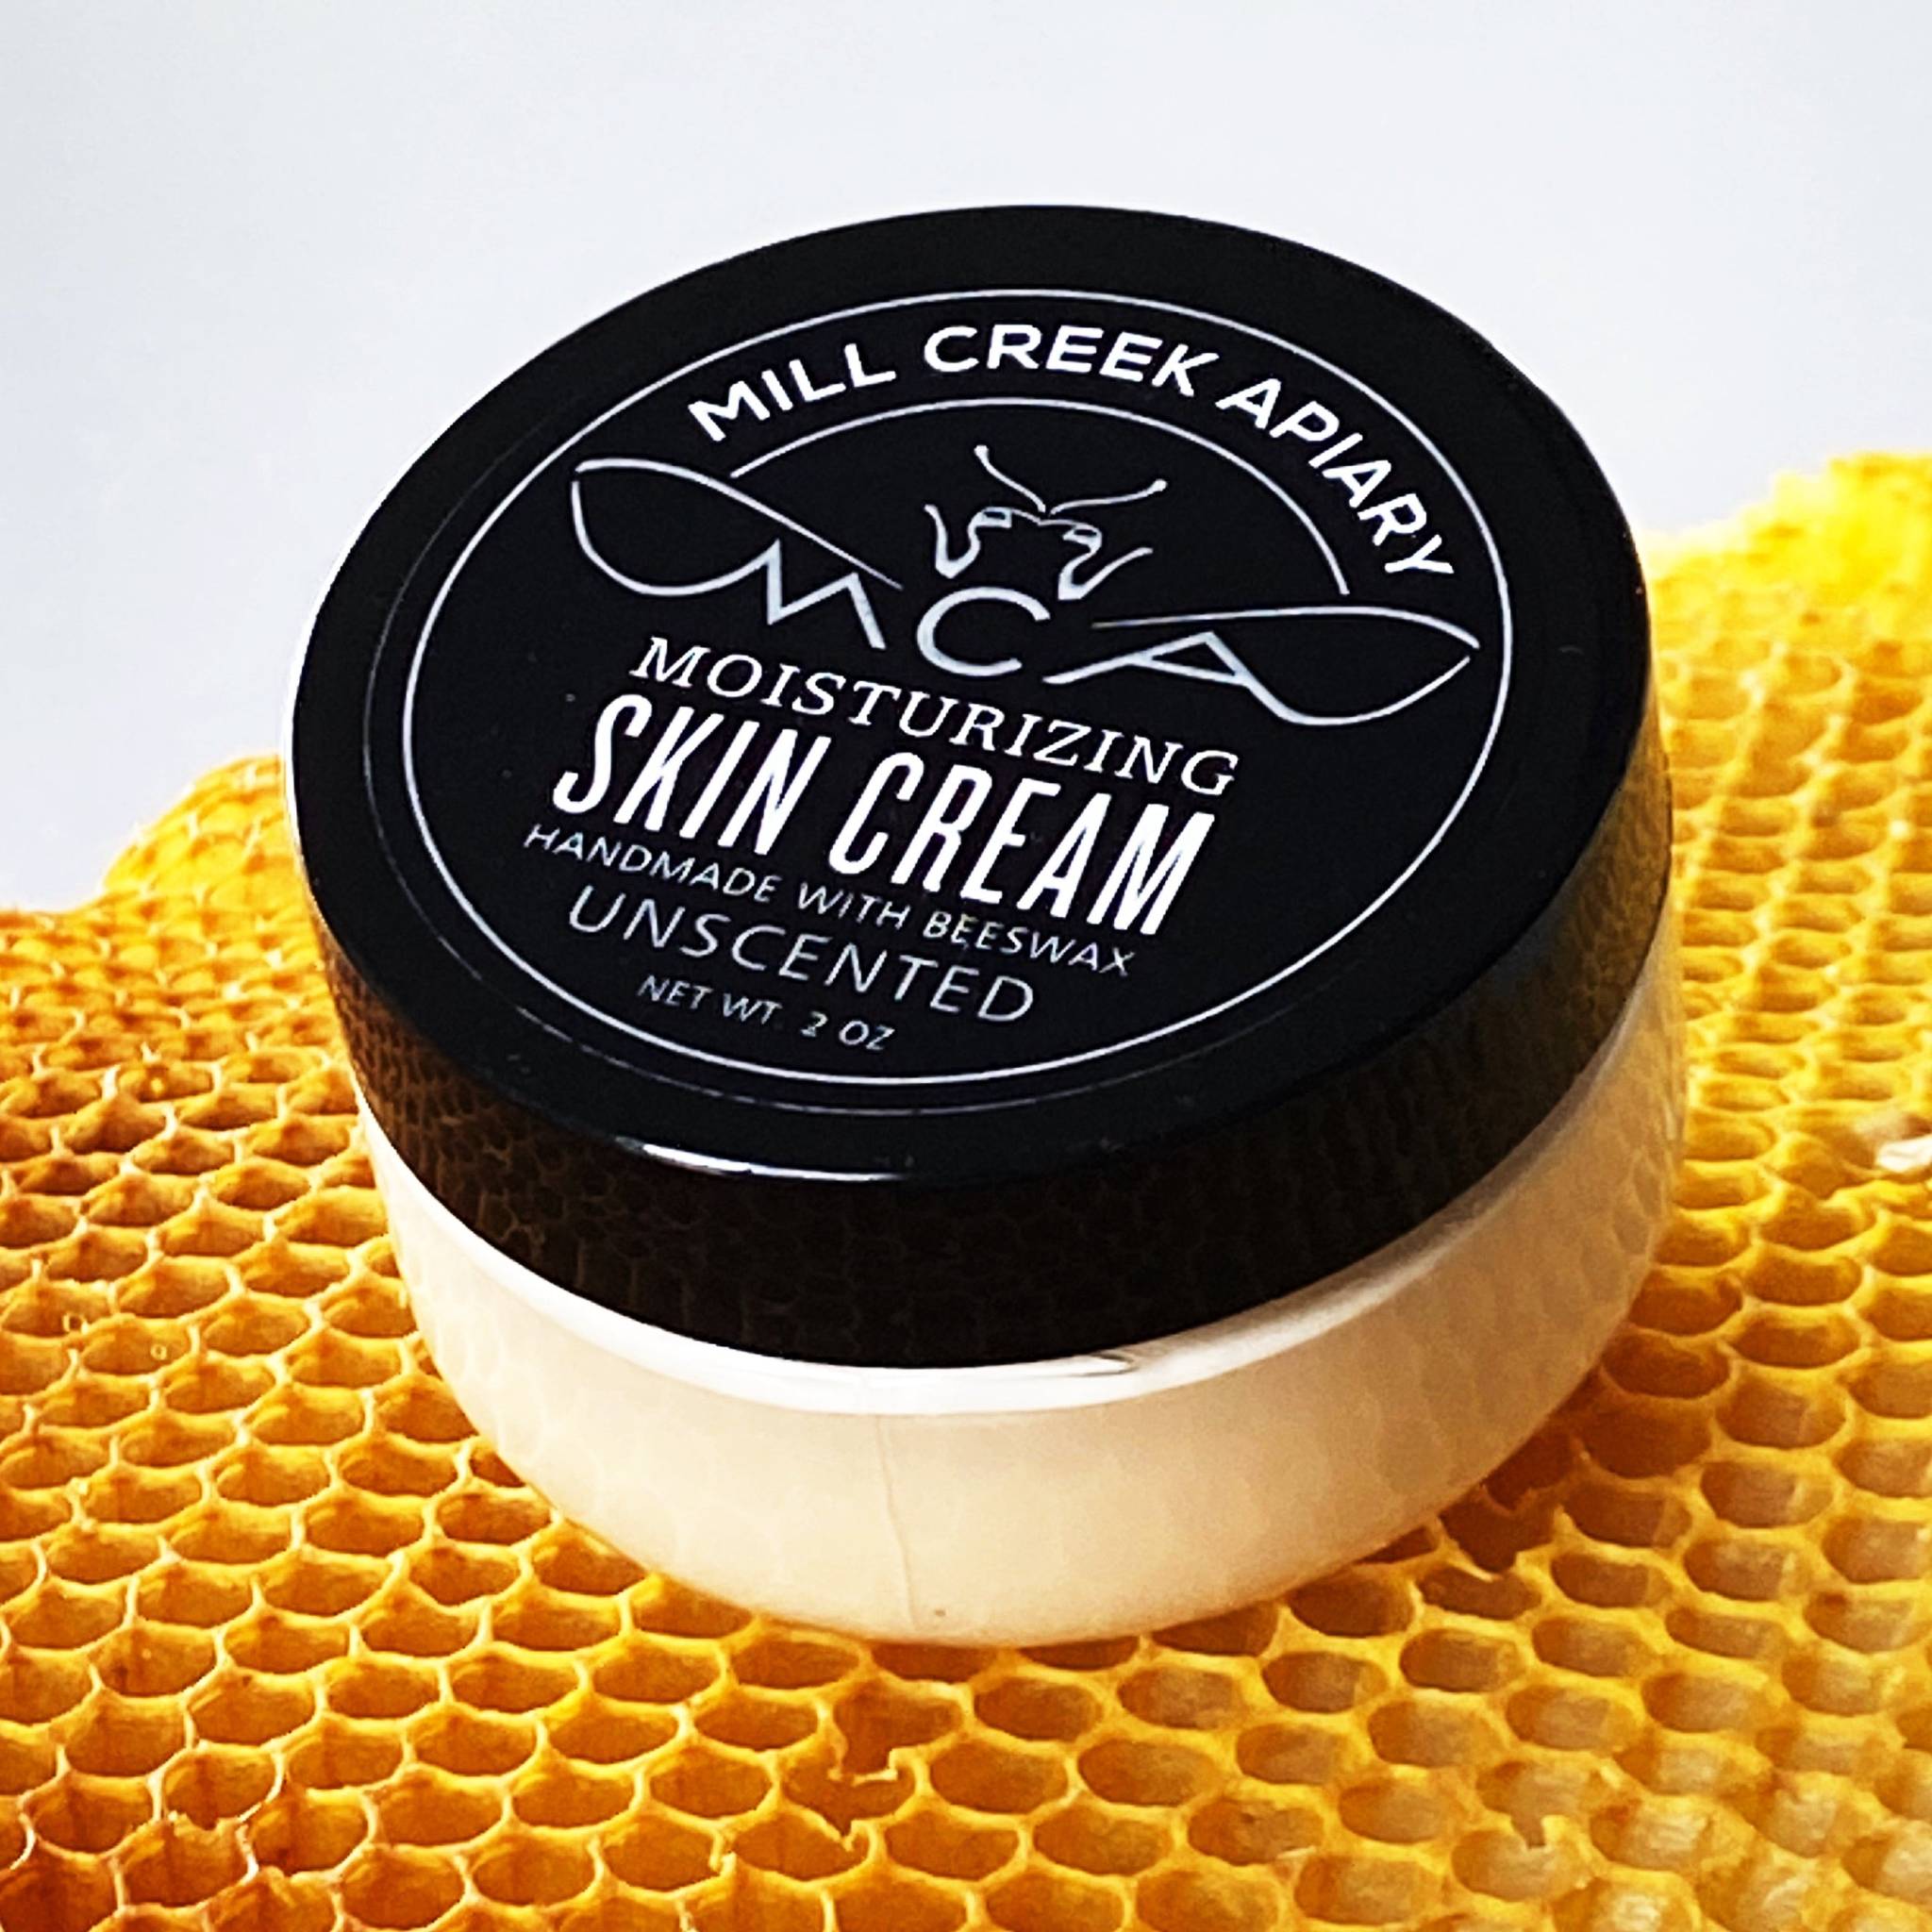 Beeswax Skin Cream, 2oz., Unscented – Mill Creek Apiary